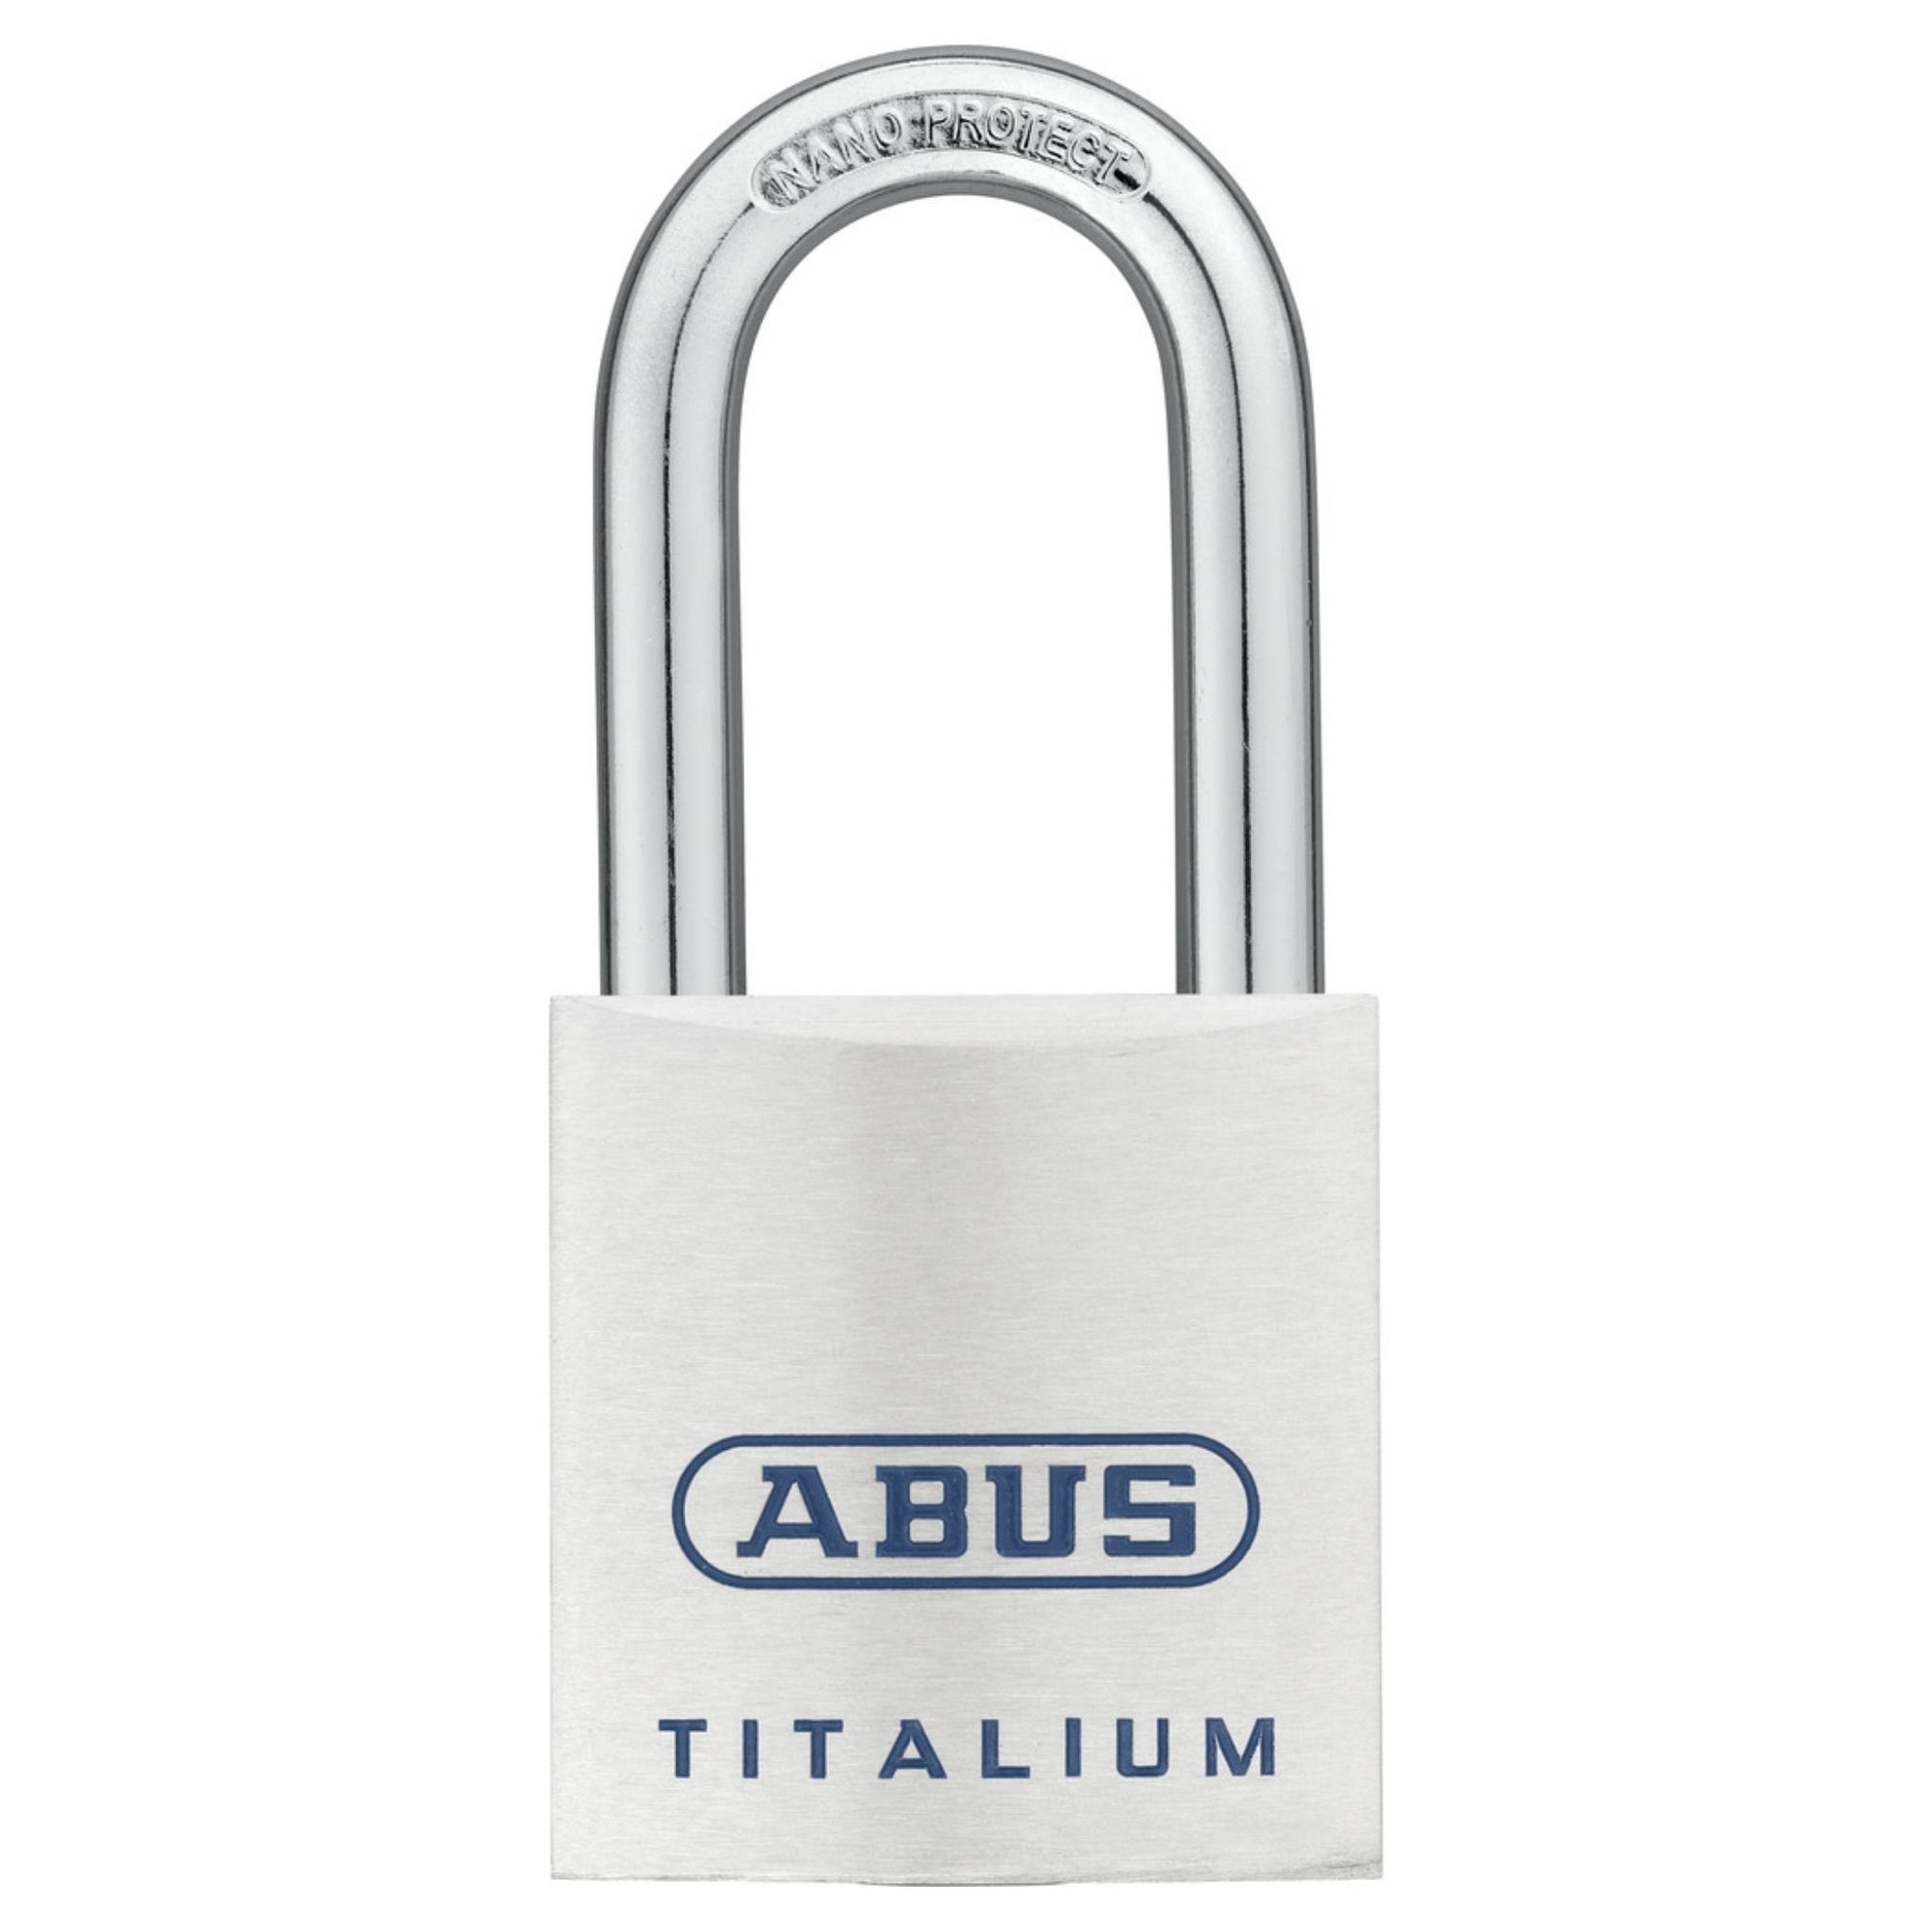 Abus 80TI/40HB40 KD Titalium Padlock Keyed Different (KD) Locks with 1-9/16-Inch Shackle - The Lock Source